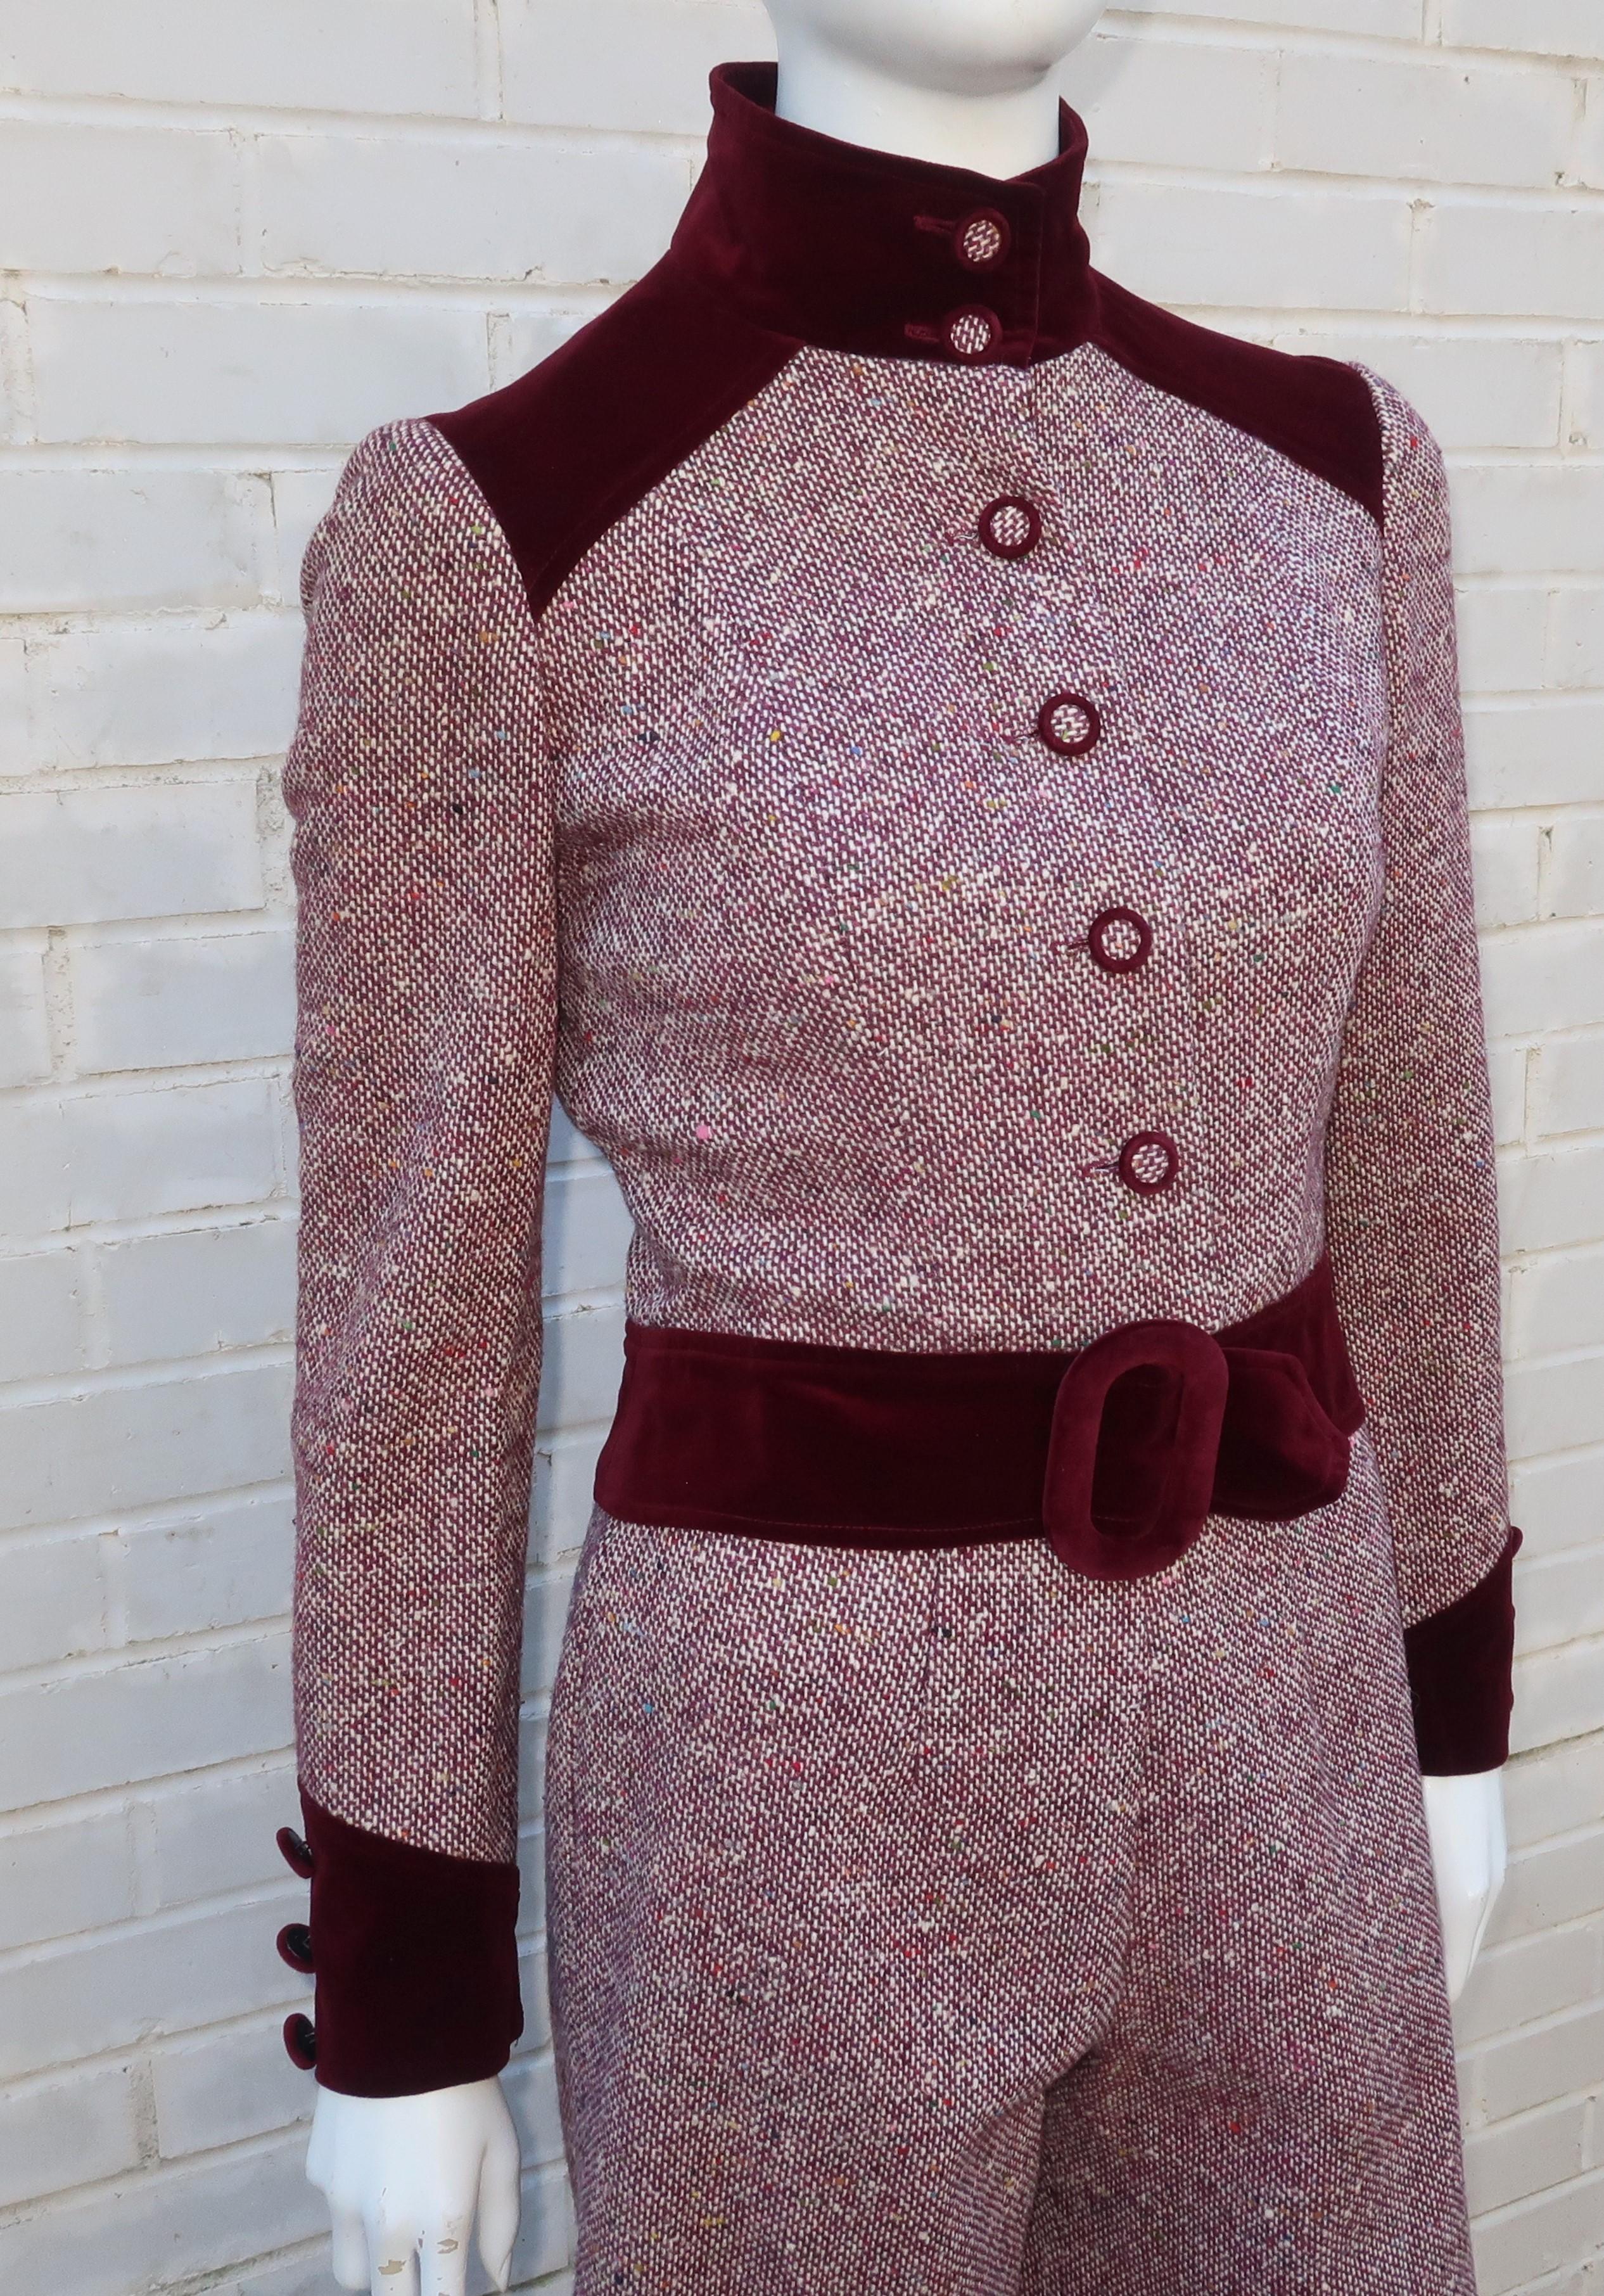 An adorable C.1970 mod pantsuit from California company, Arpeja, for their Young Victorian line designed with a trendy youthful appeal.  The two piece suit consists of a form fitting short jacket with self belt and high waist cropped gaucho style